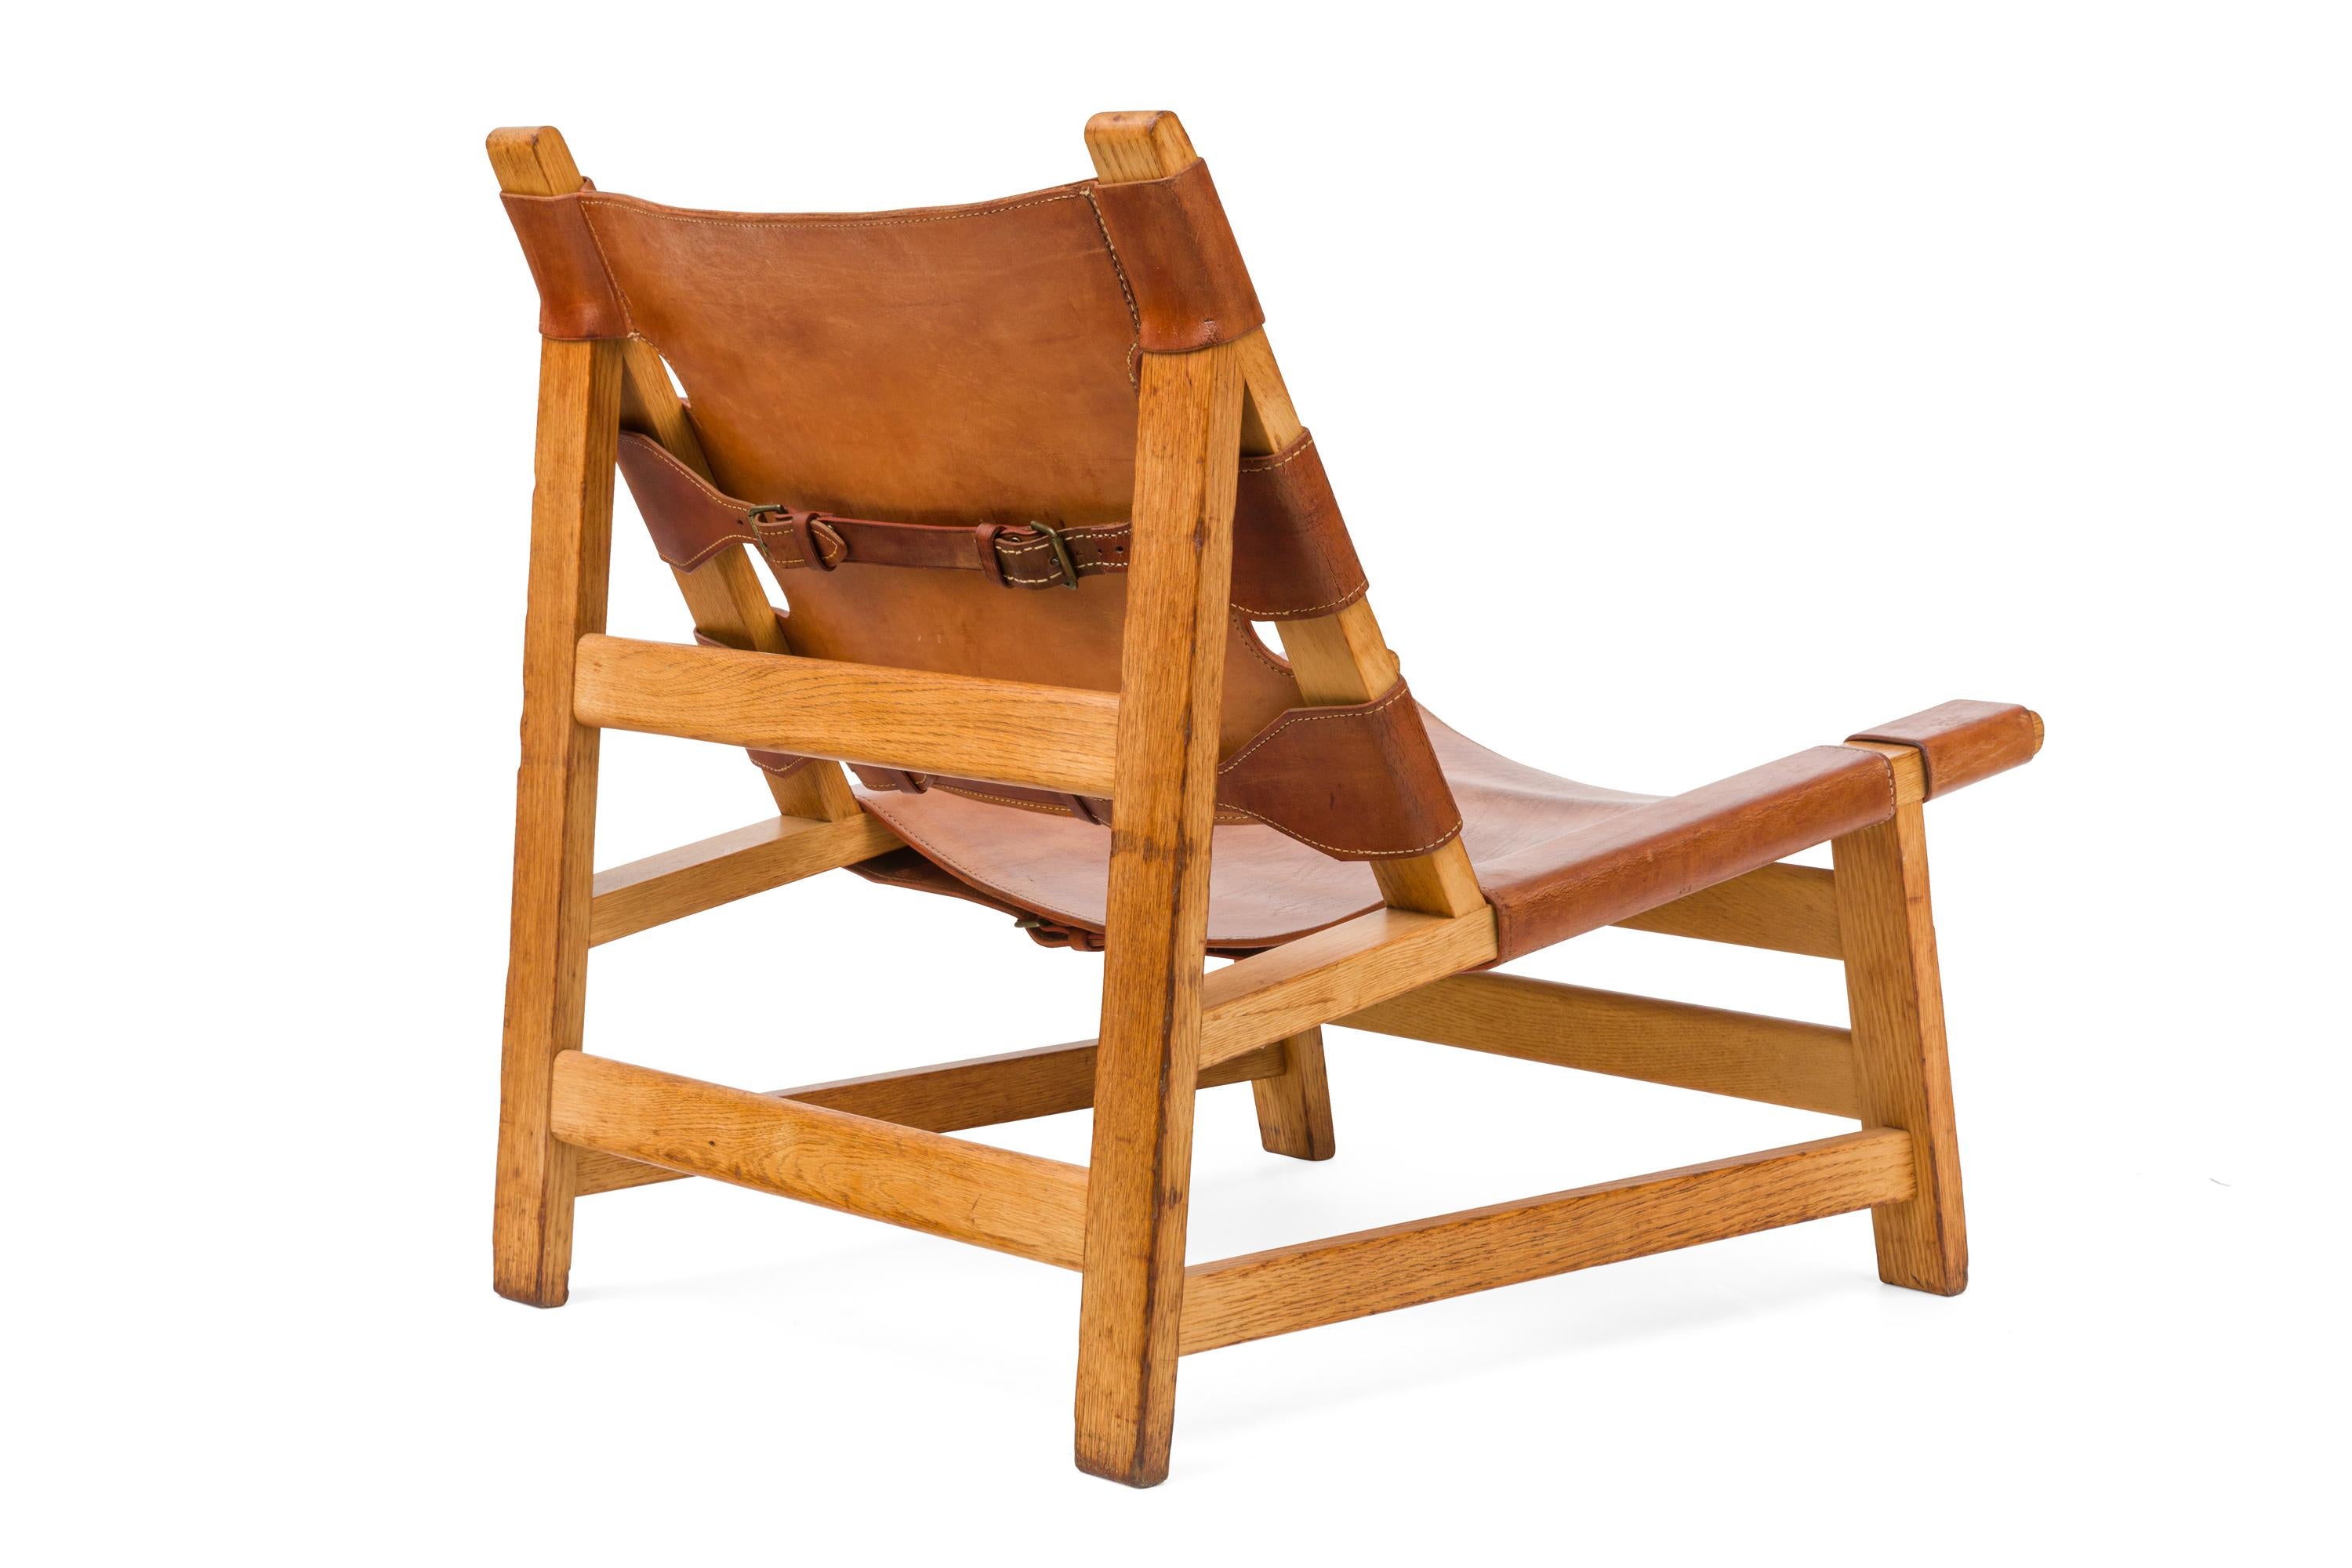 Børge Mogensen Oak and Leather Lounge Chairs, Denmark, 1960s For Sale 2